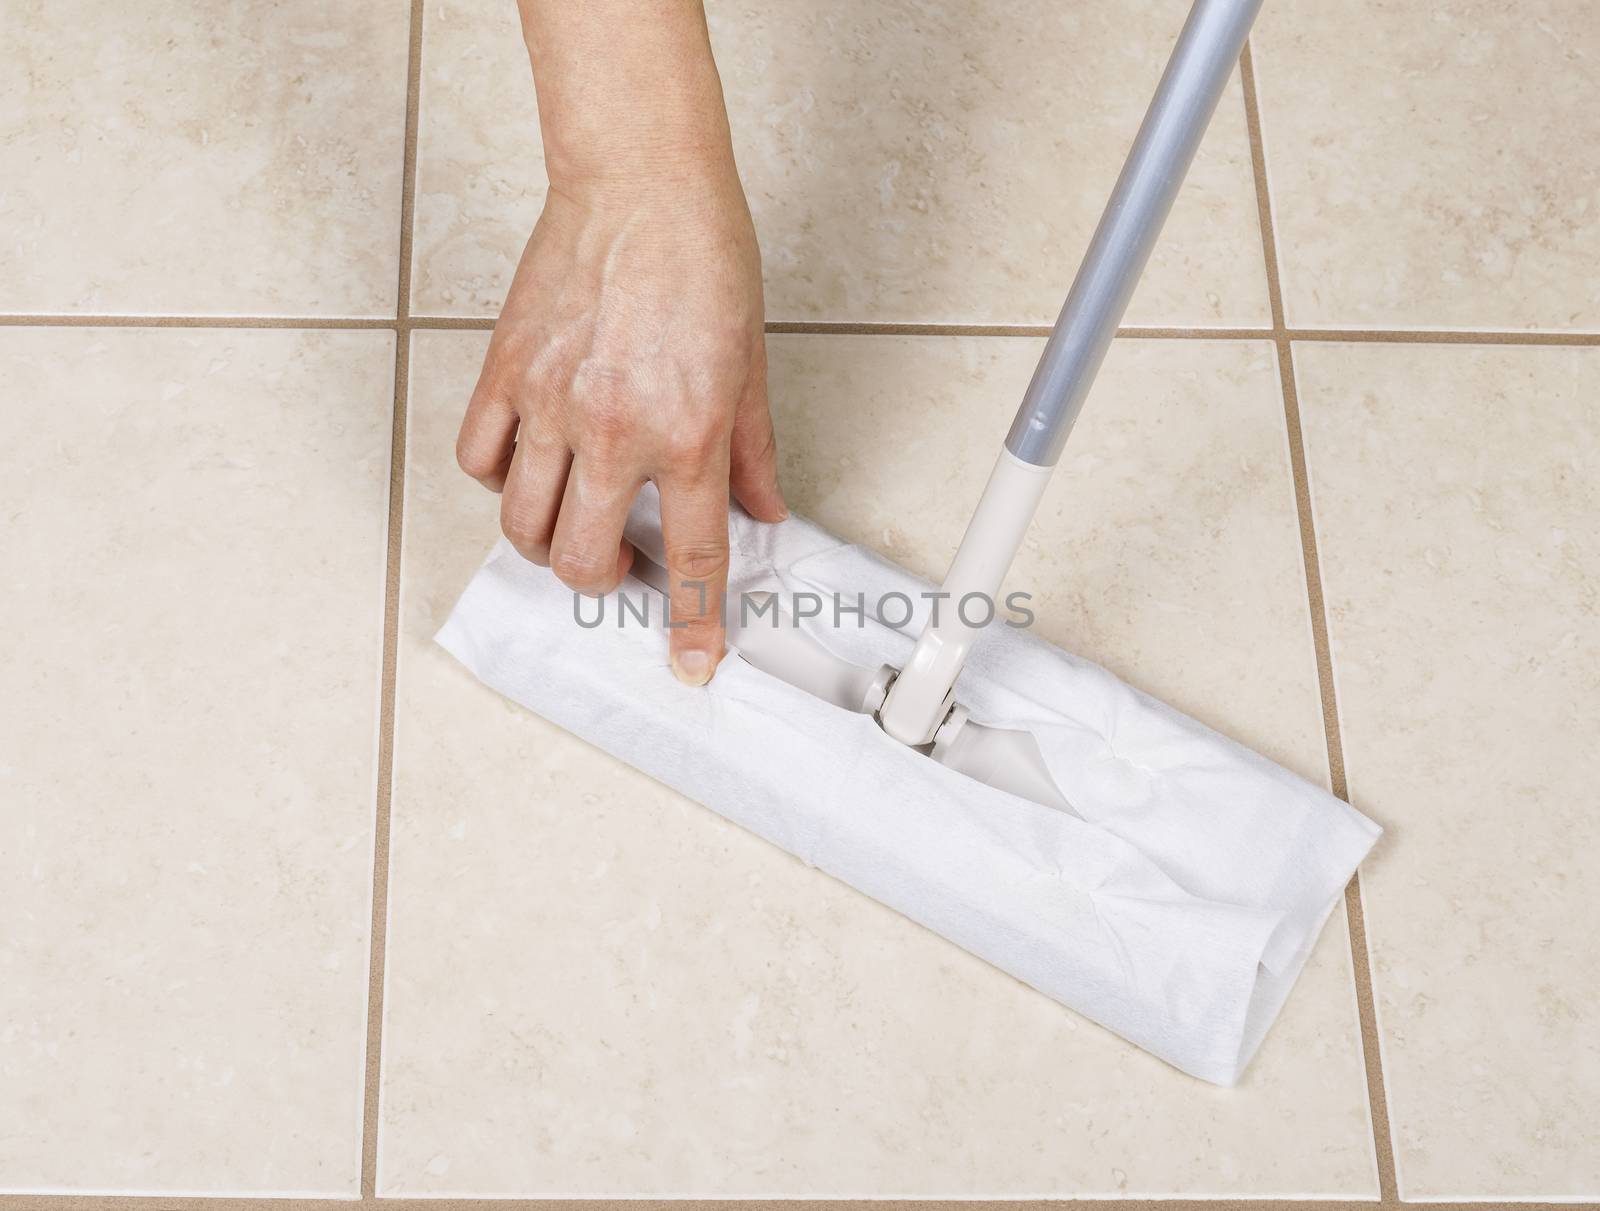 Cleaning Bathroom Tile  by tab1962